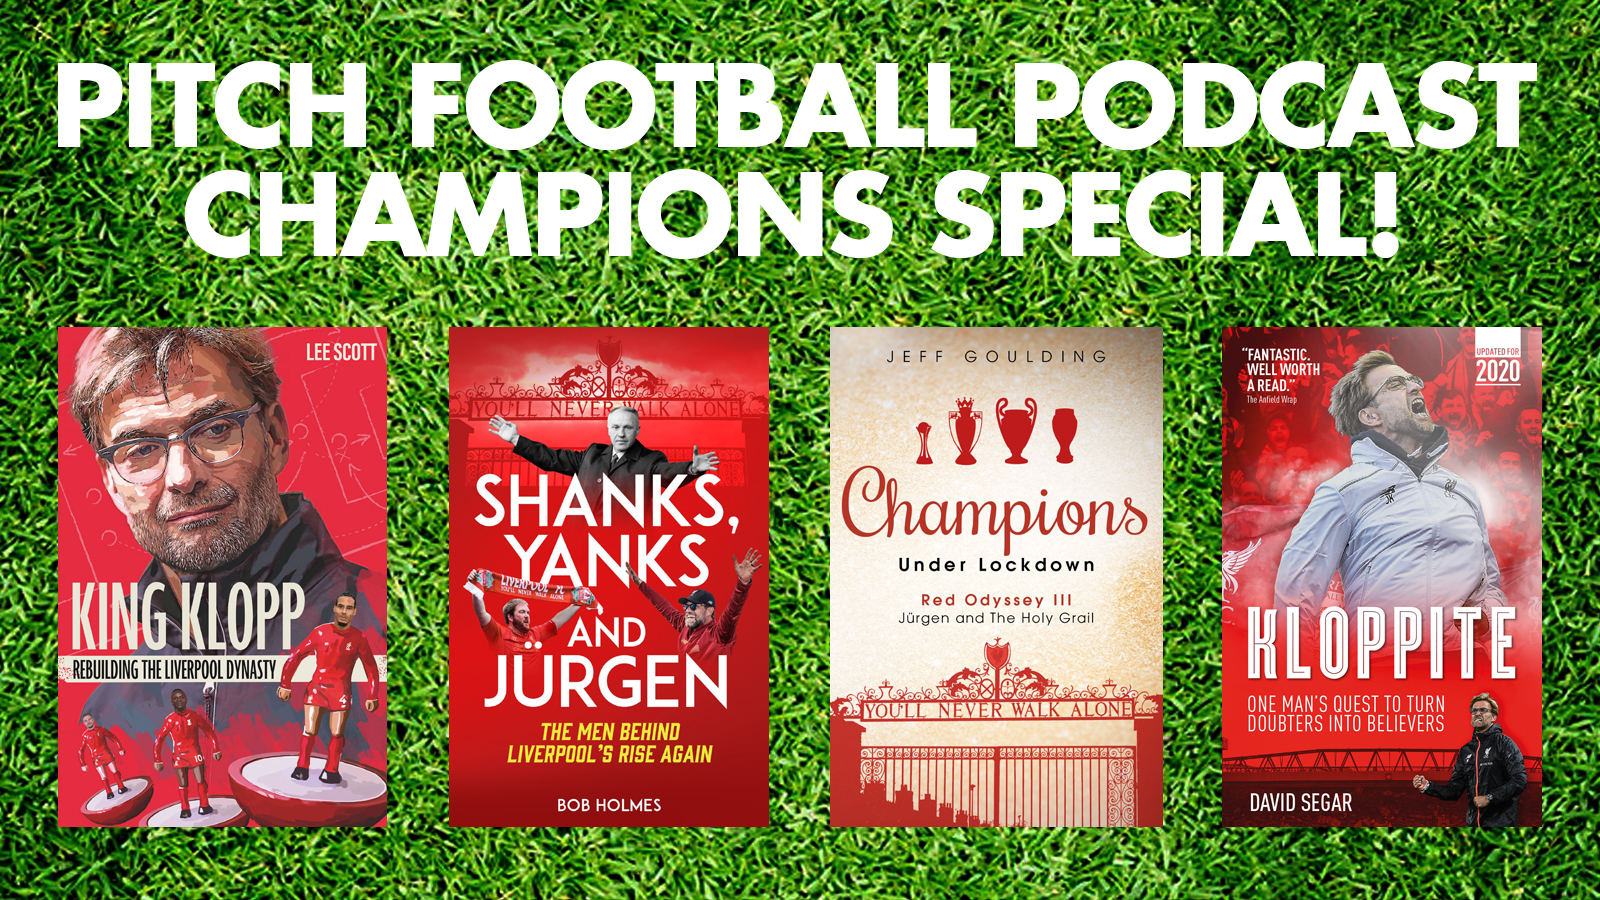 FIRST LIVE PODCAST IS A CHAMPIONS SPECIAL!